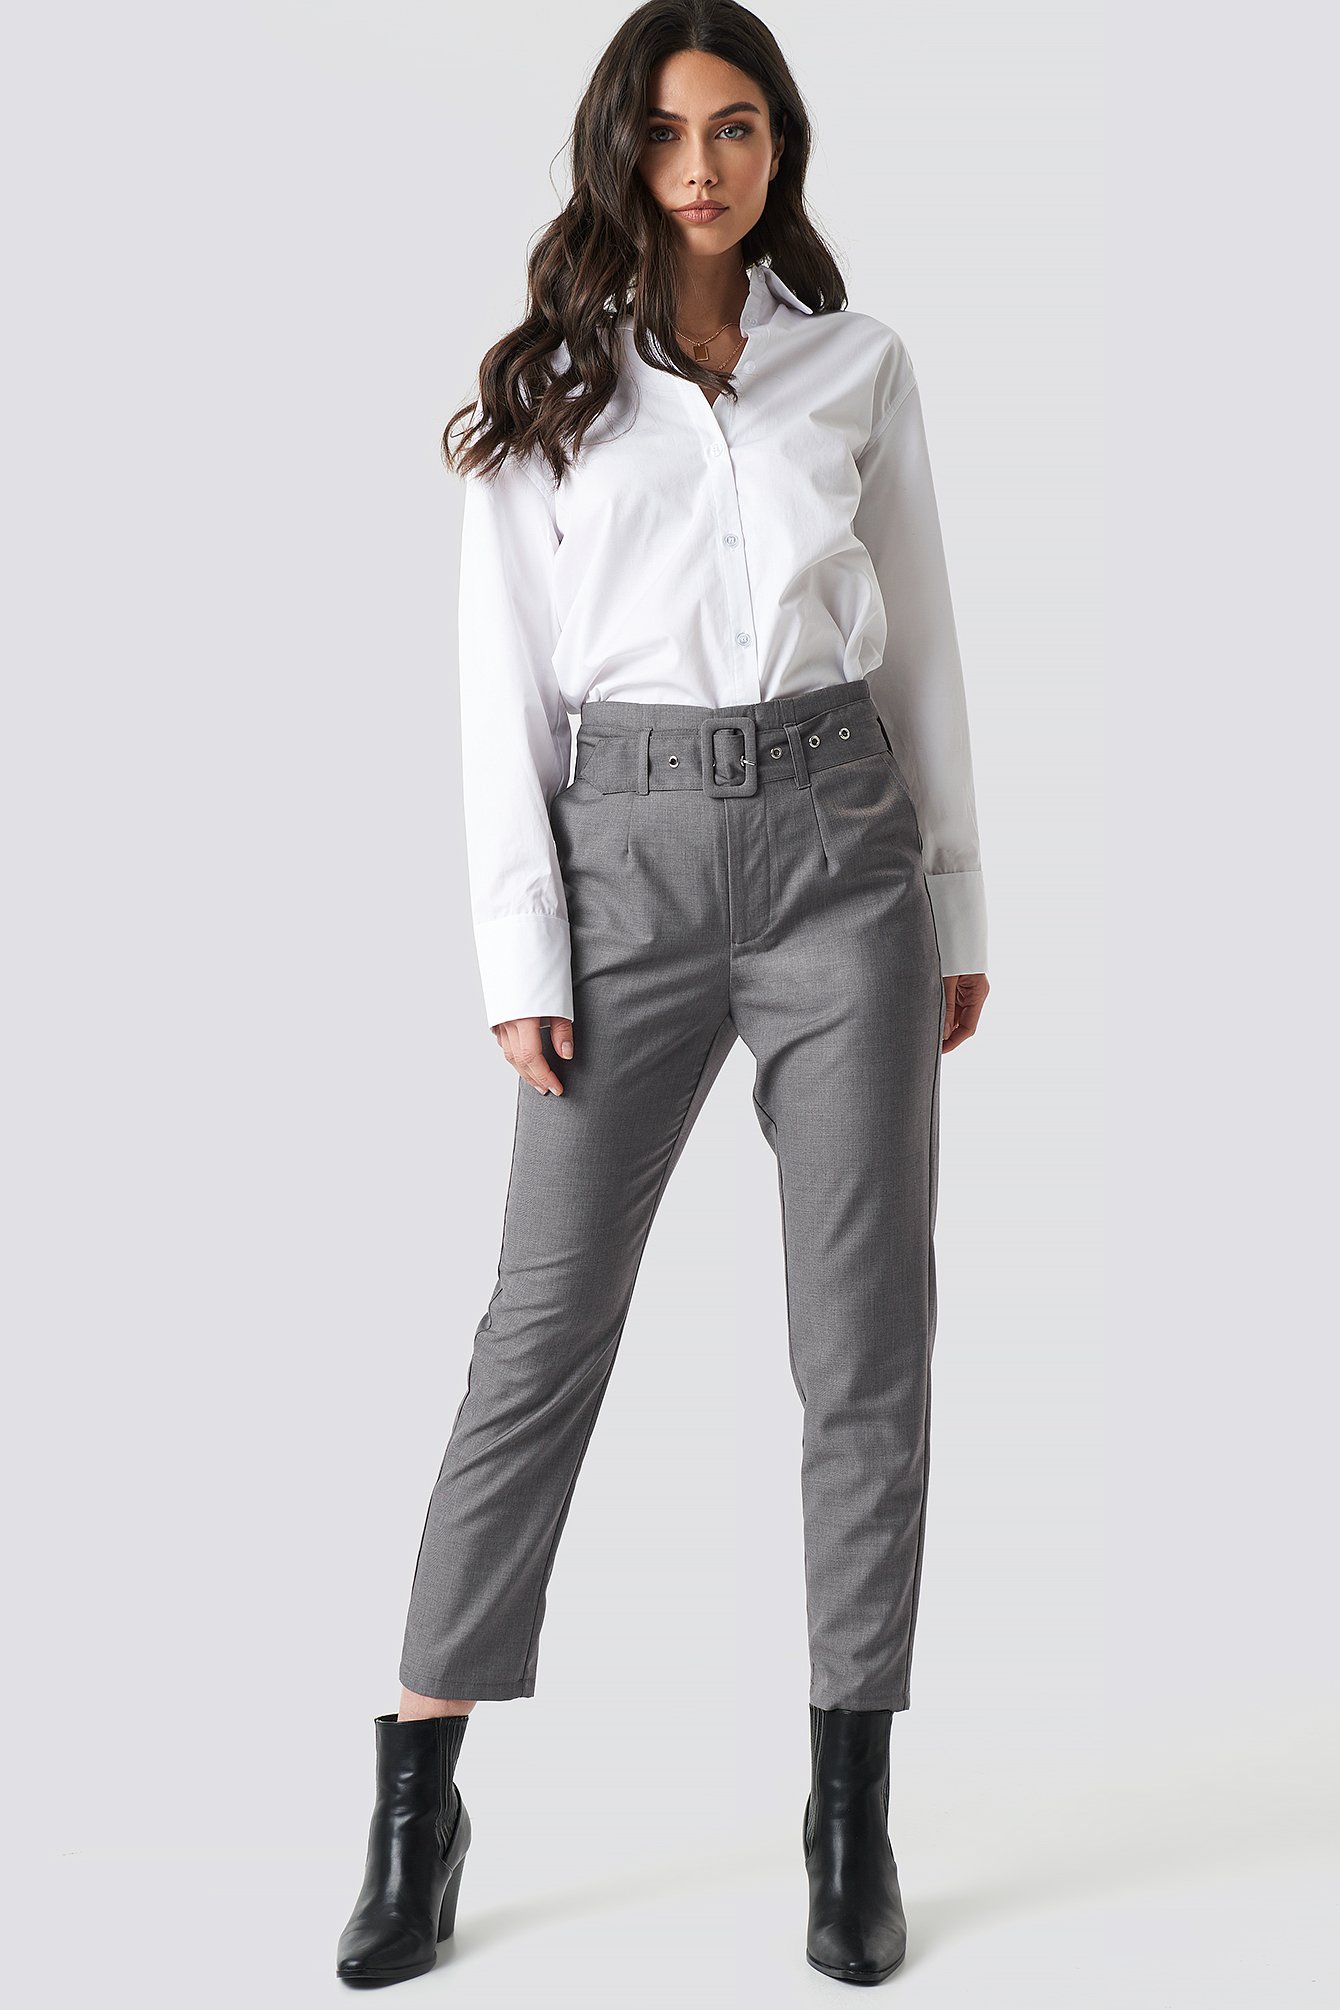 Grey NA-KD Classic High Waist Belted Pants